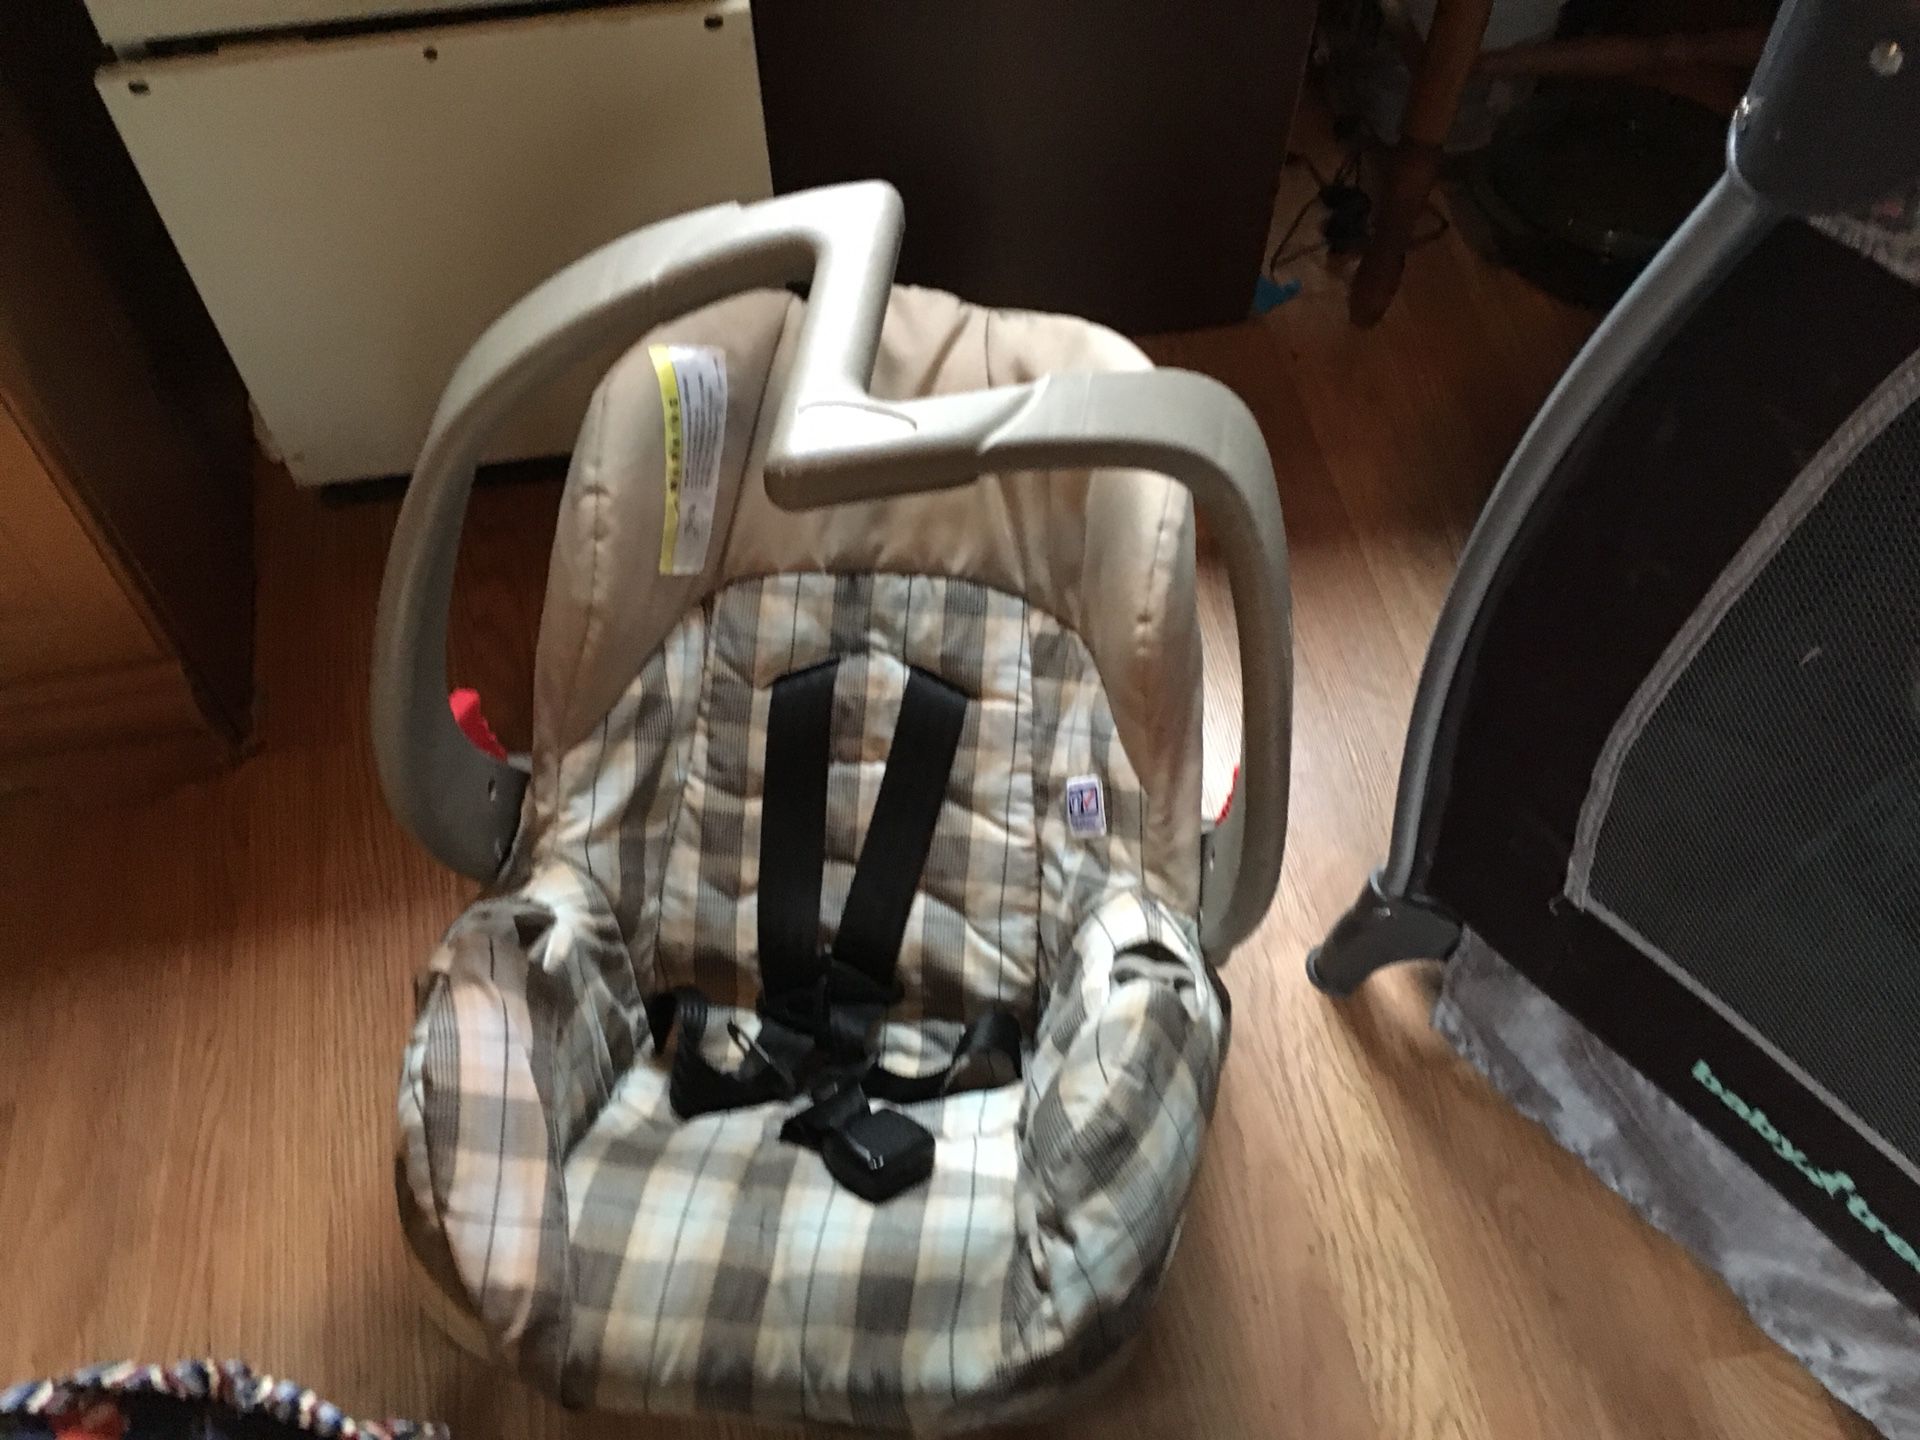 Car seat/carrier